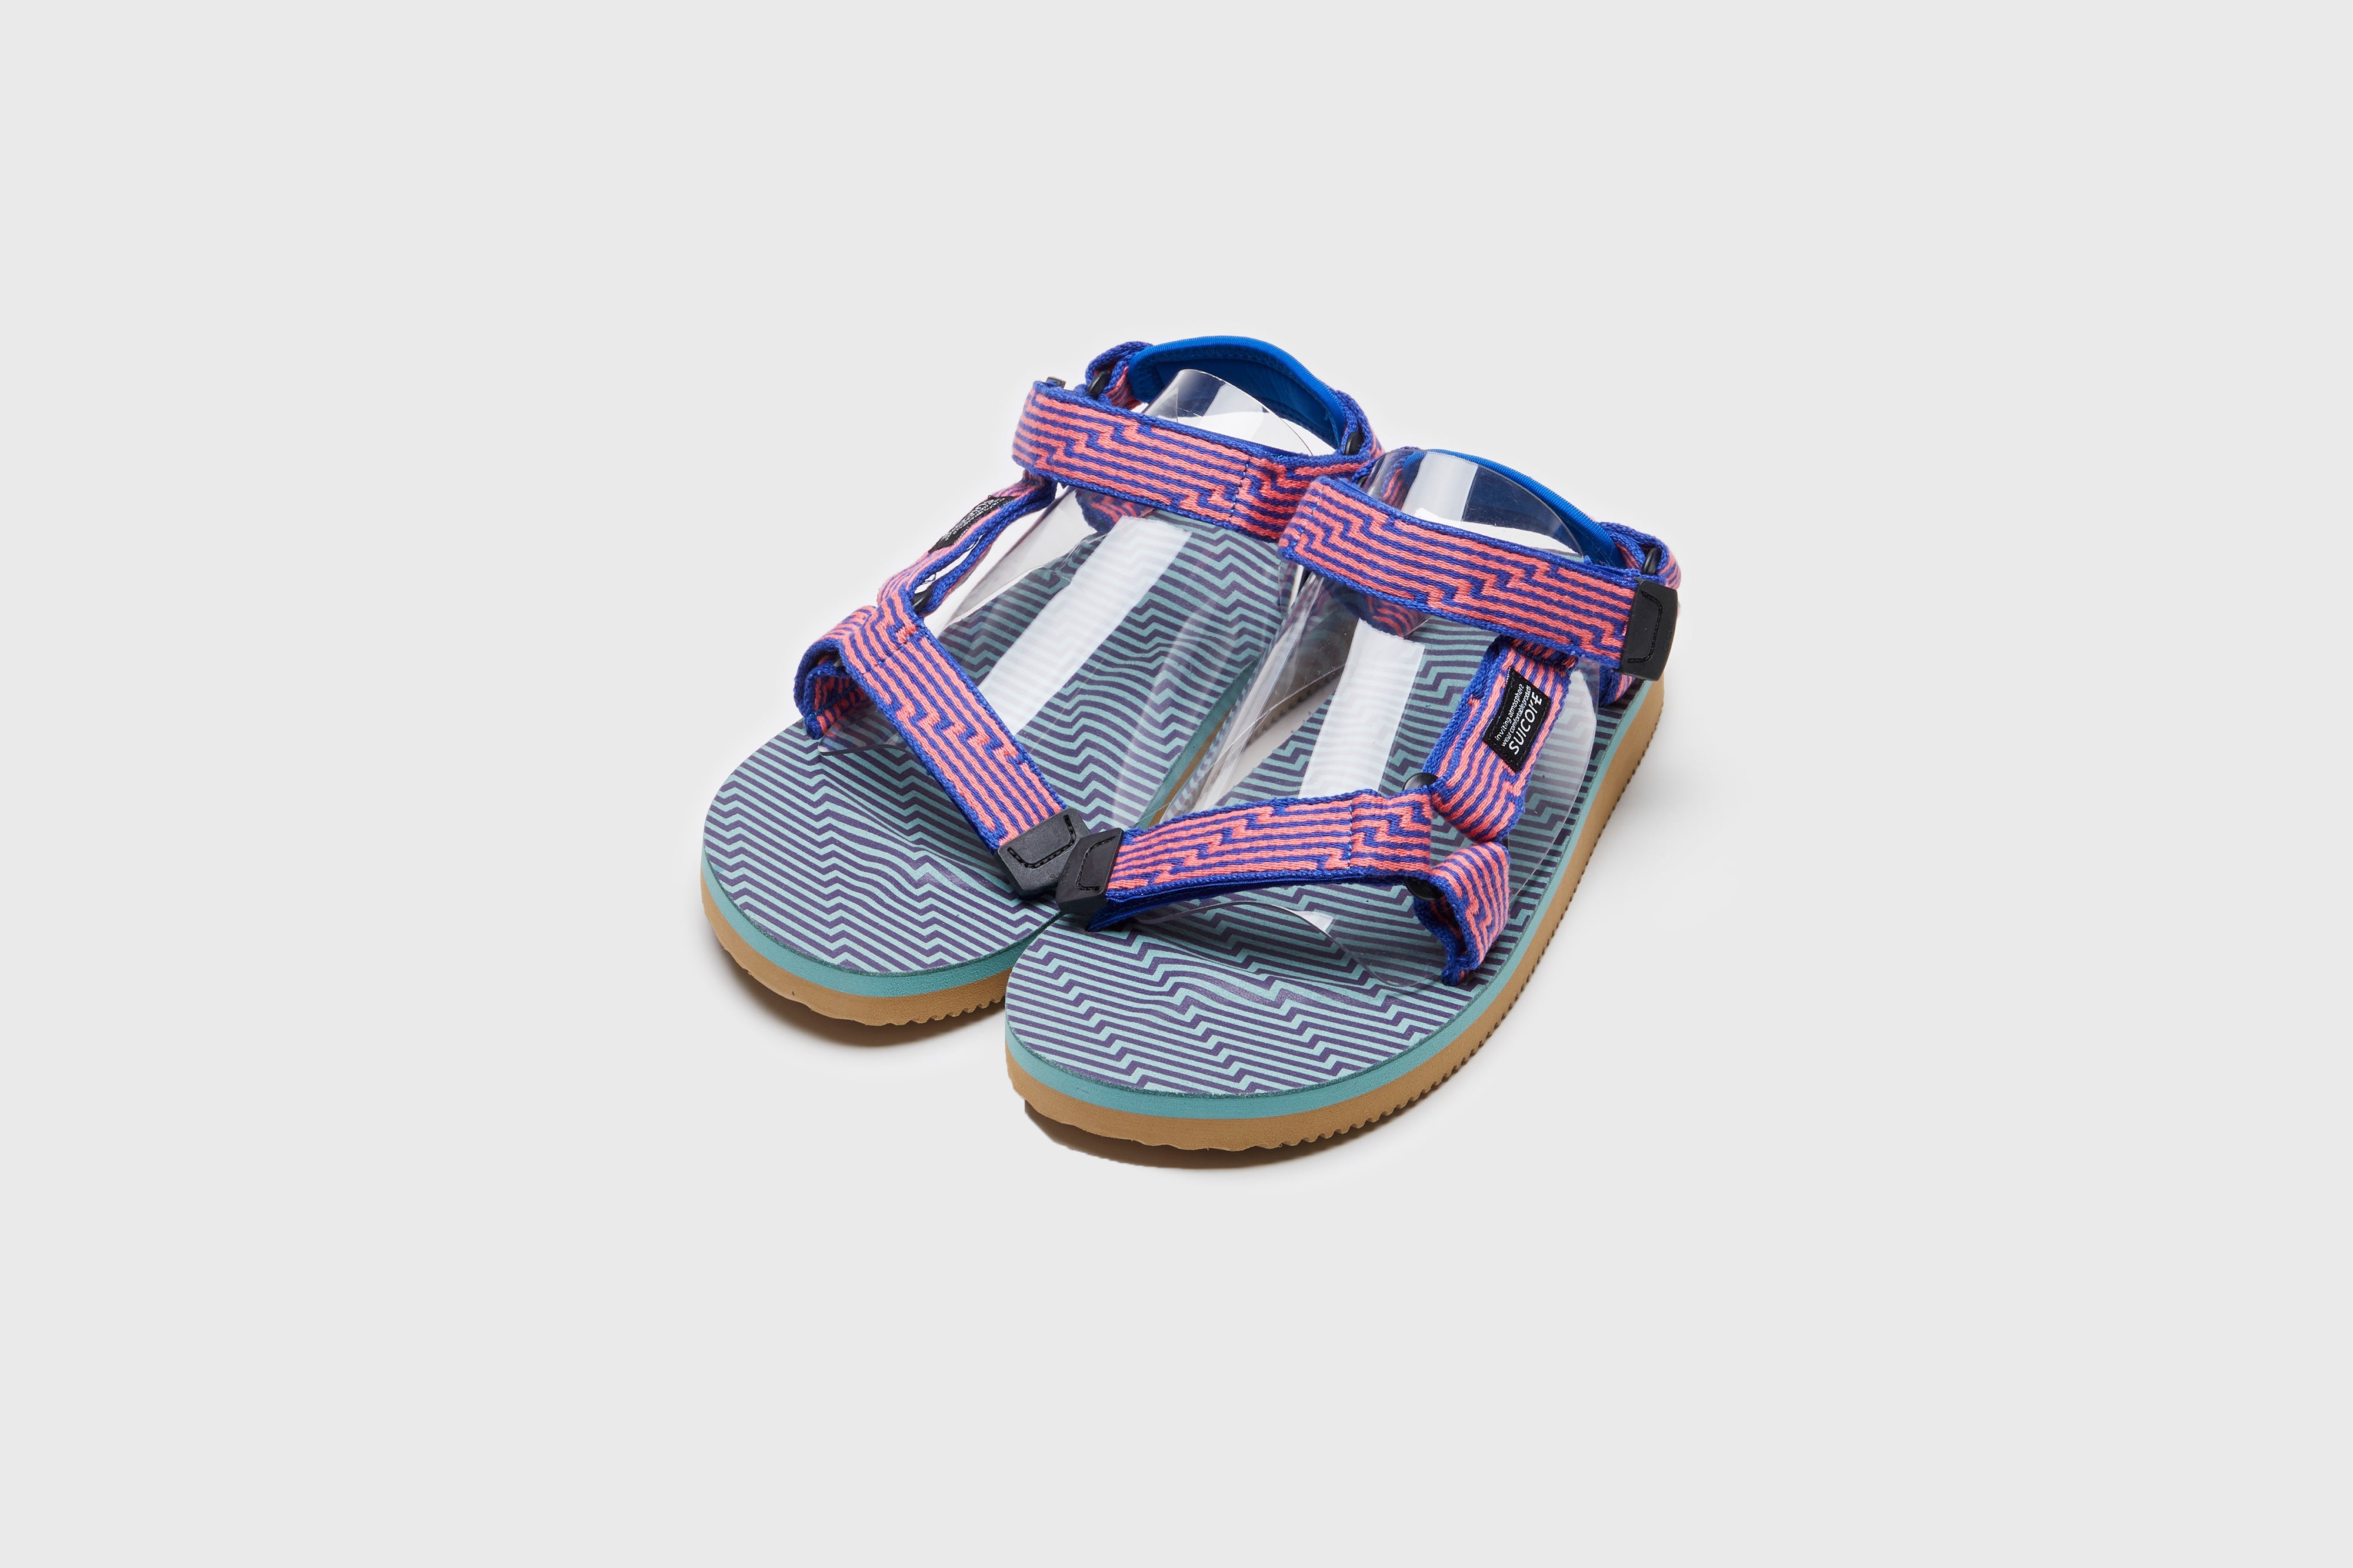 SUICOKE DEPA-JC01 sandals with orange &amp; blue nylon upper, orange &amp; blue midsole and sole, strap and logo patch. From Spring/Summer 2023 collection on eightywingold Web Store, an official partner of SUICOKE. OG-022-JC01 ORANGE X BLUE